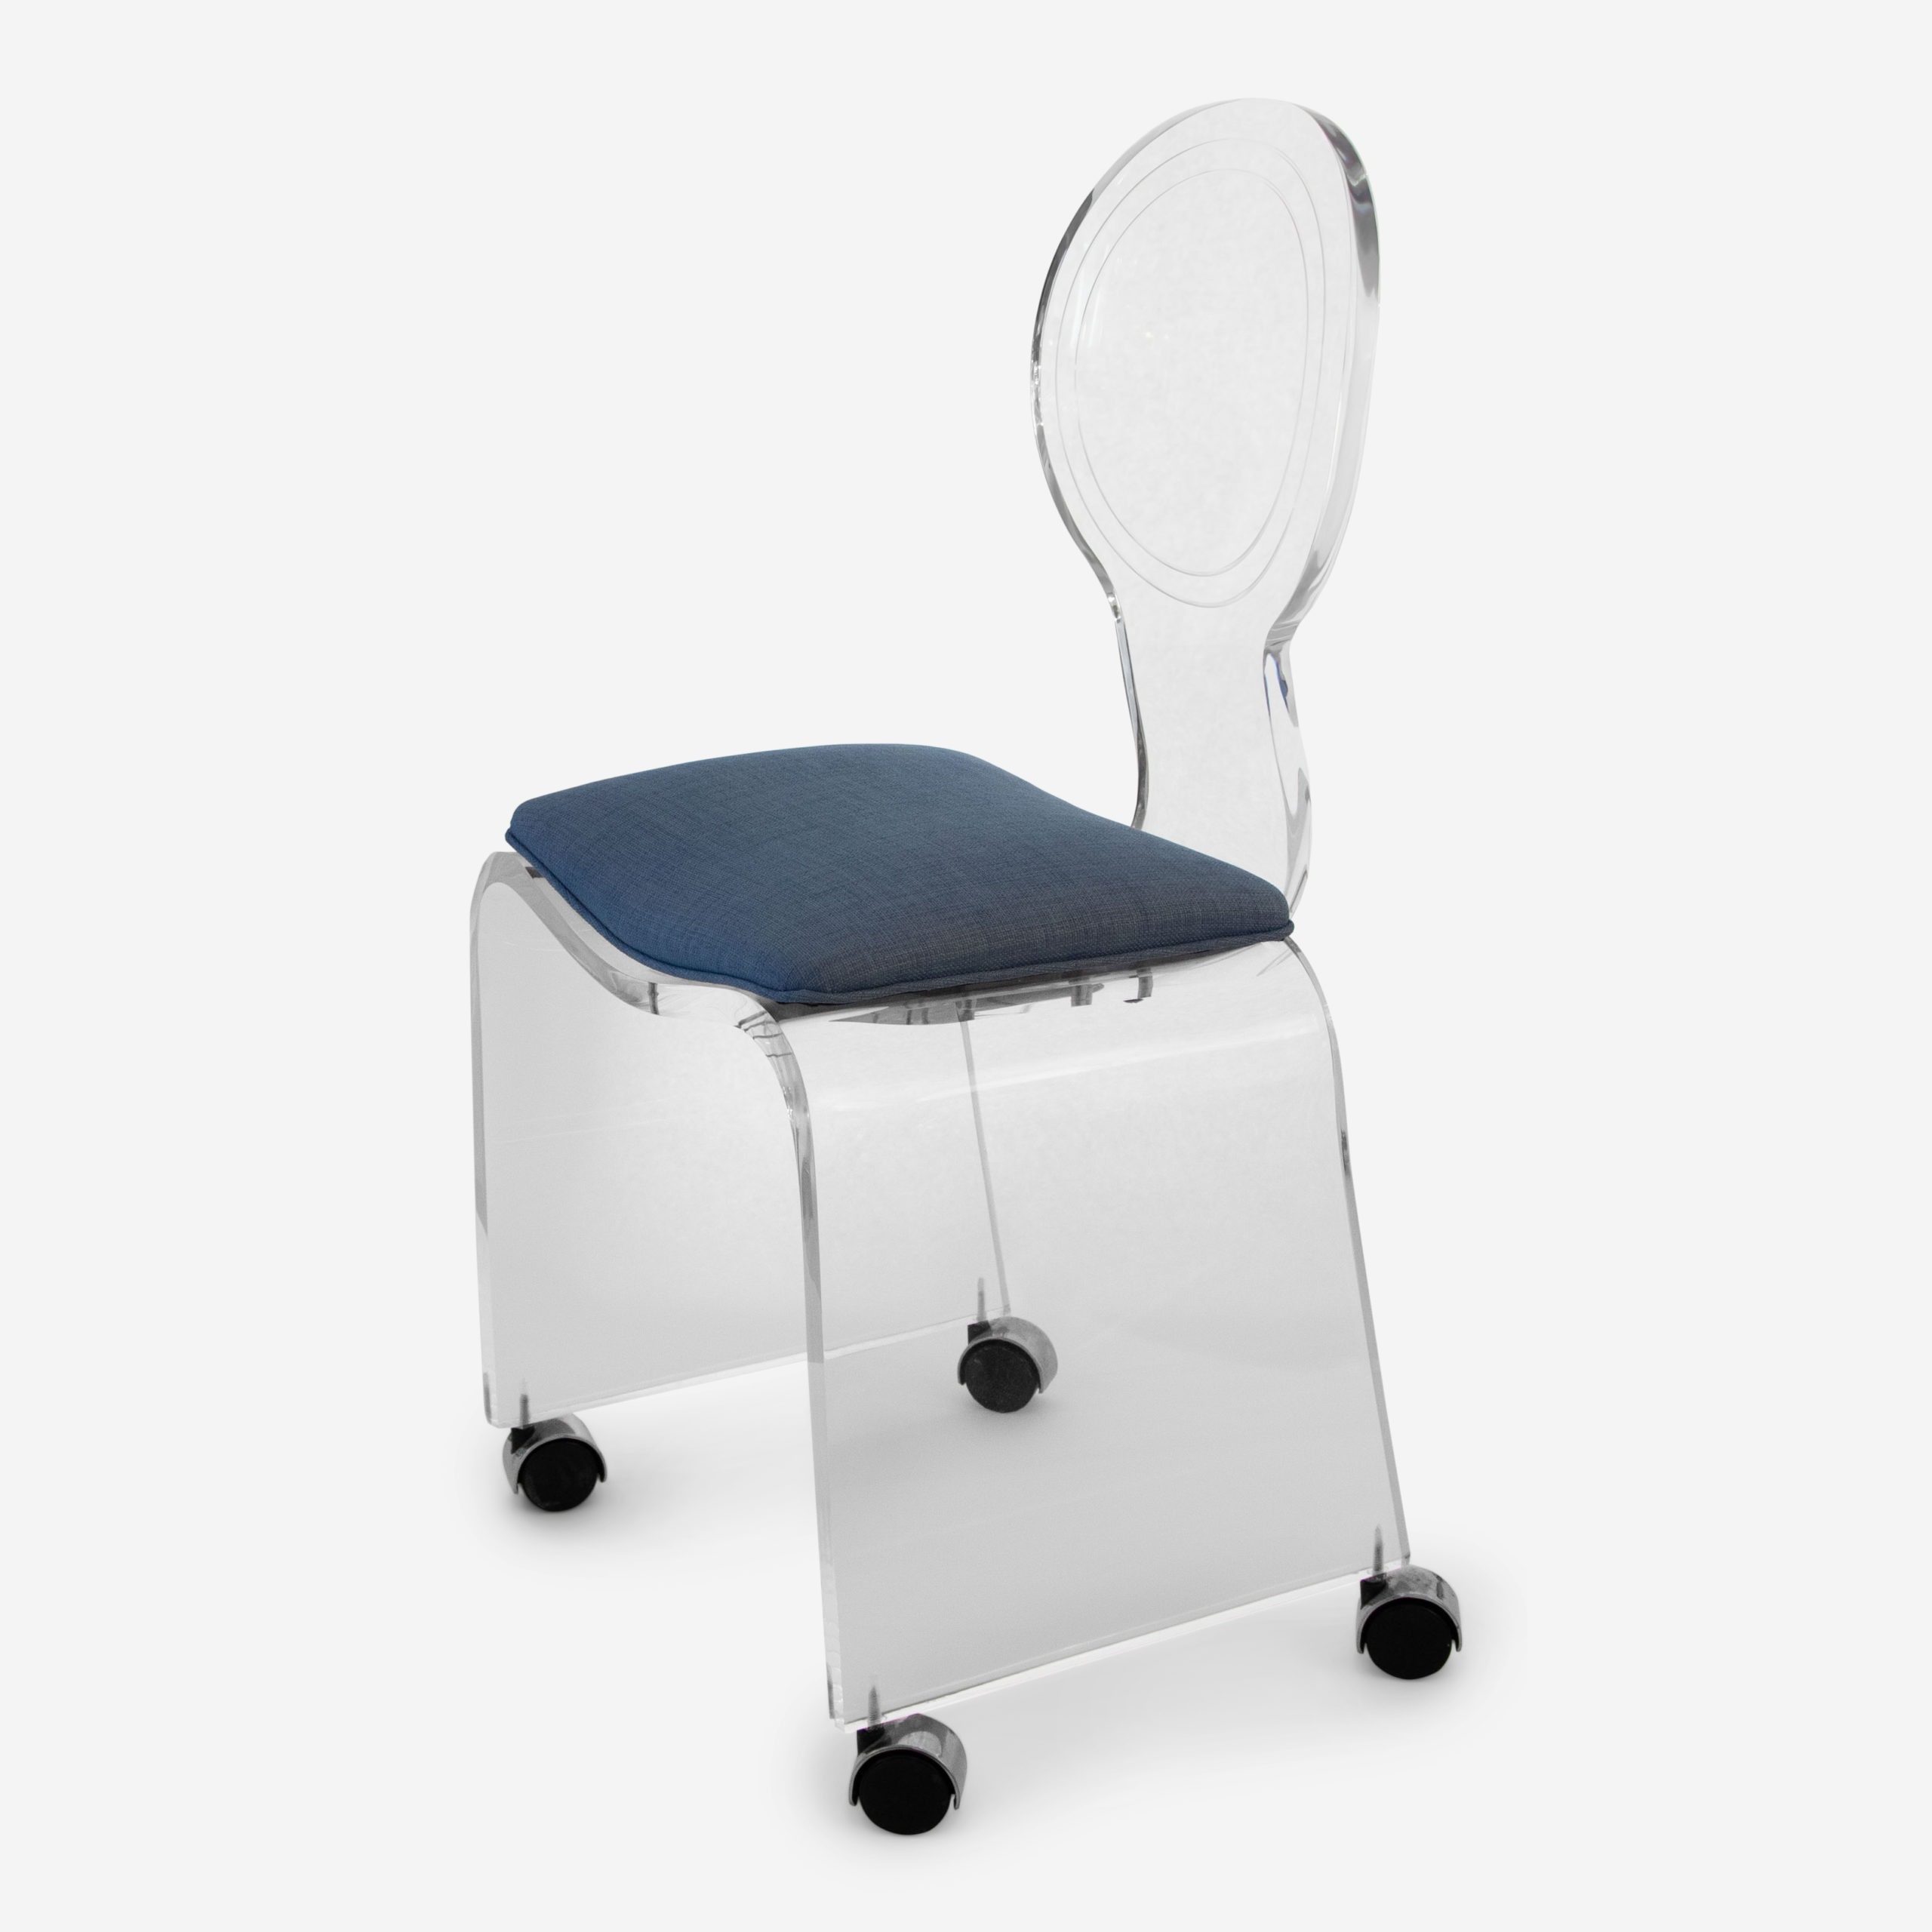 Lucite Vanity Stool With Wheels The, Lucite Vanity Stool On Wheels